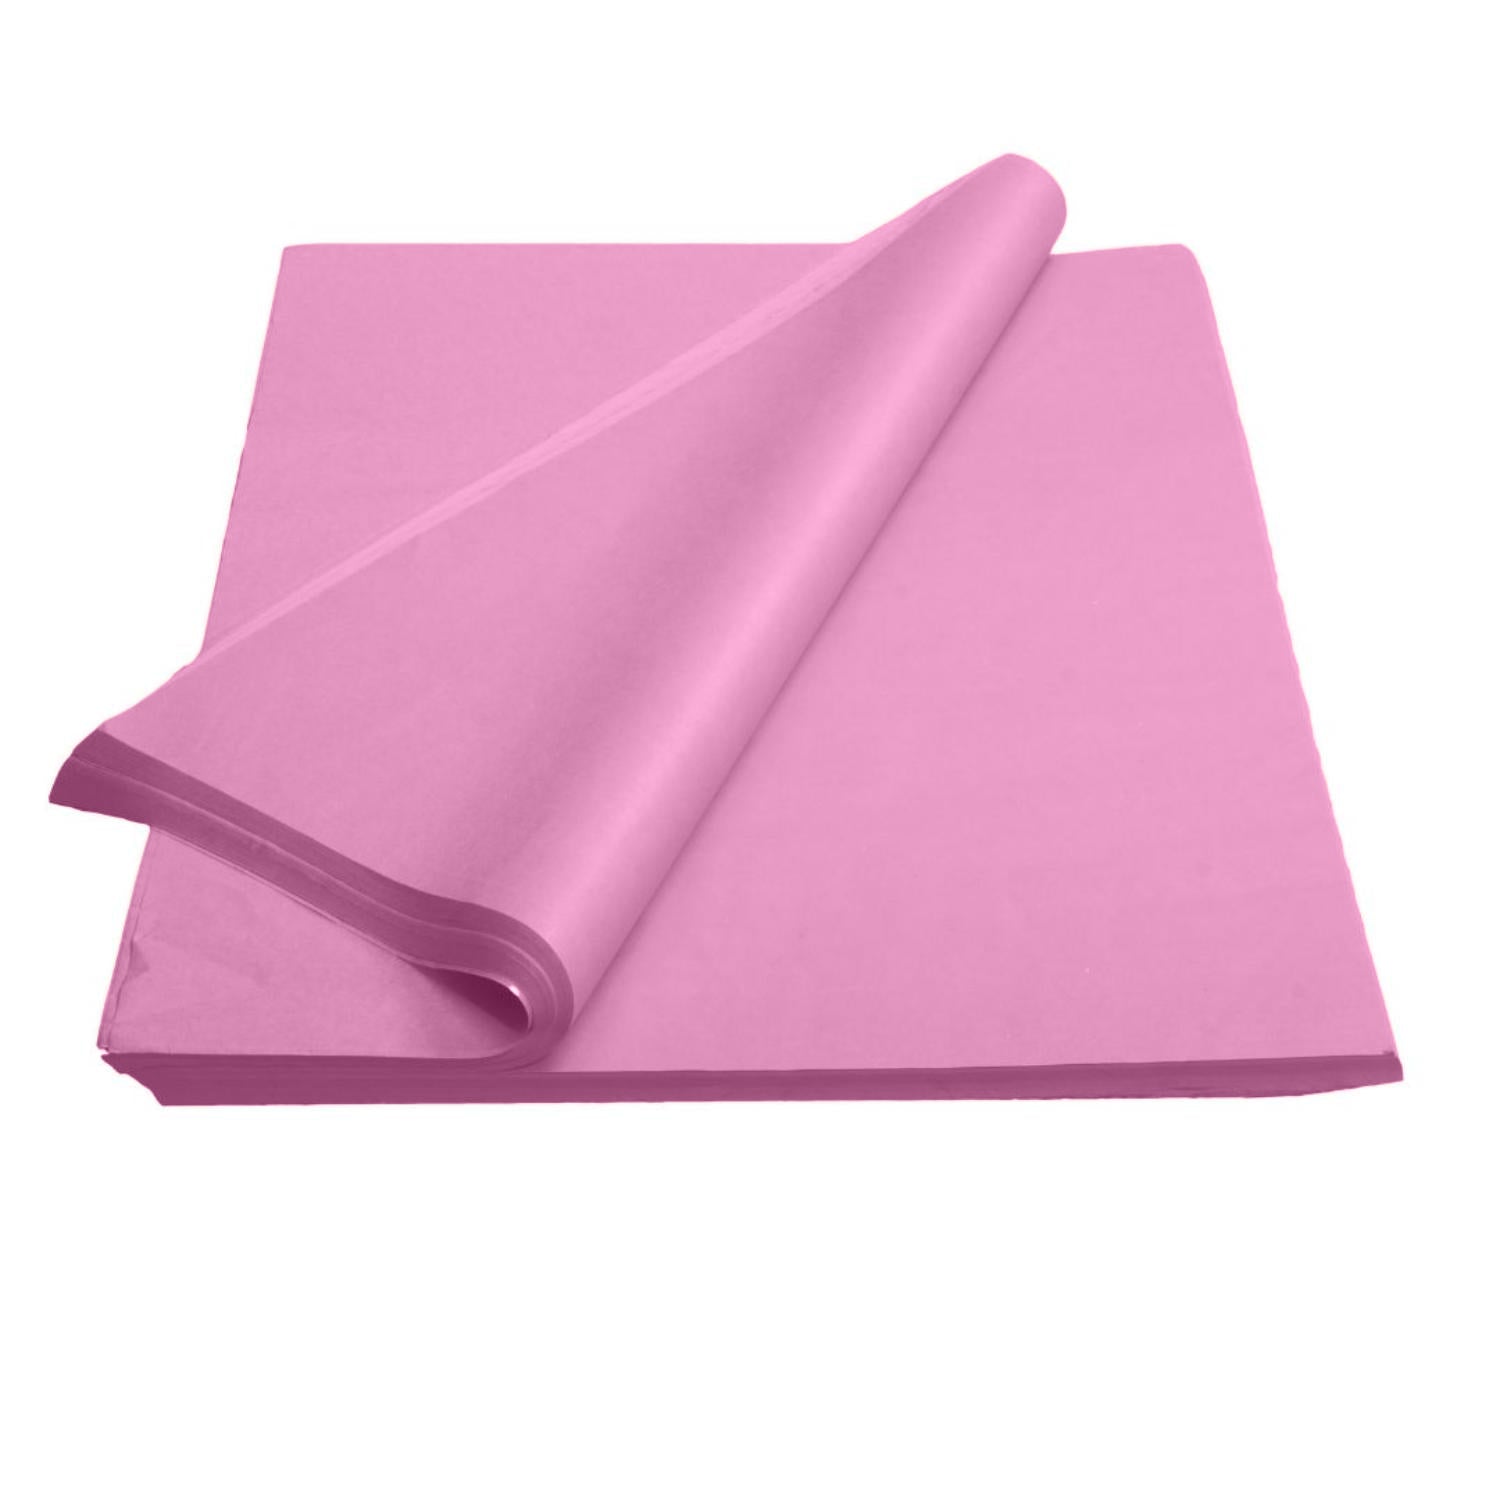 Honeysuckle (Pink) Color Tissue Paper 20 x 30 480 Sheets / Ream